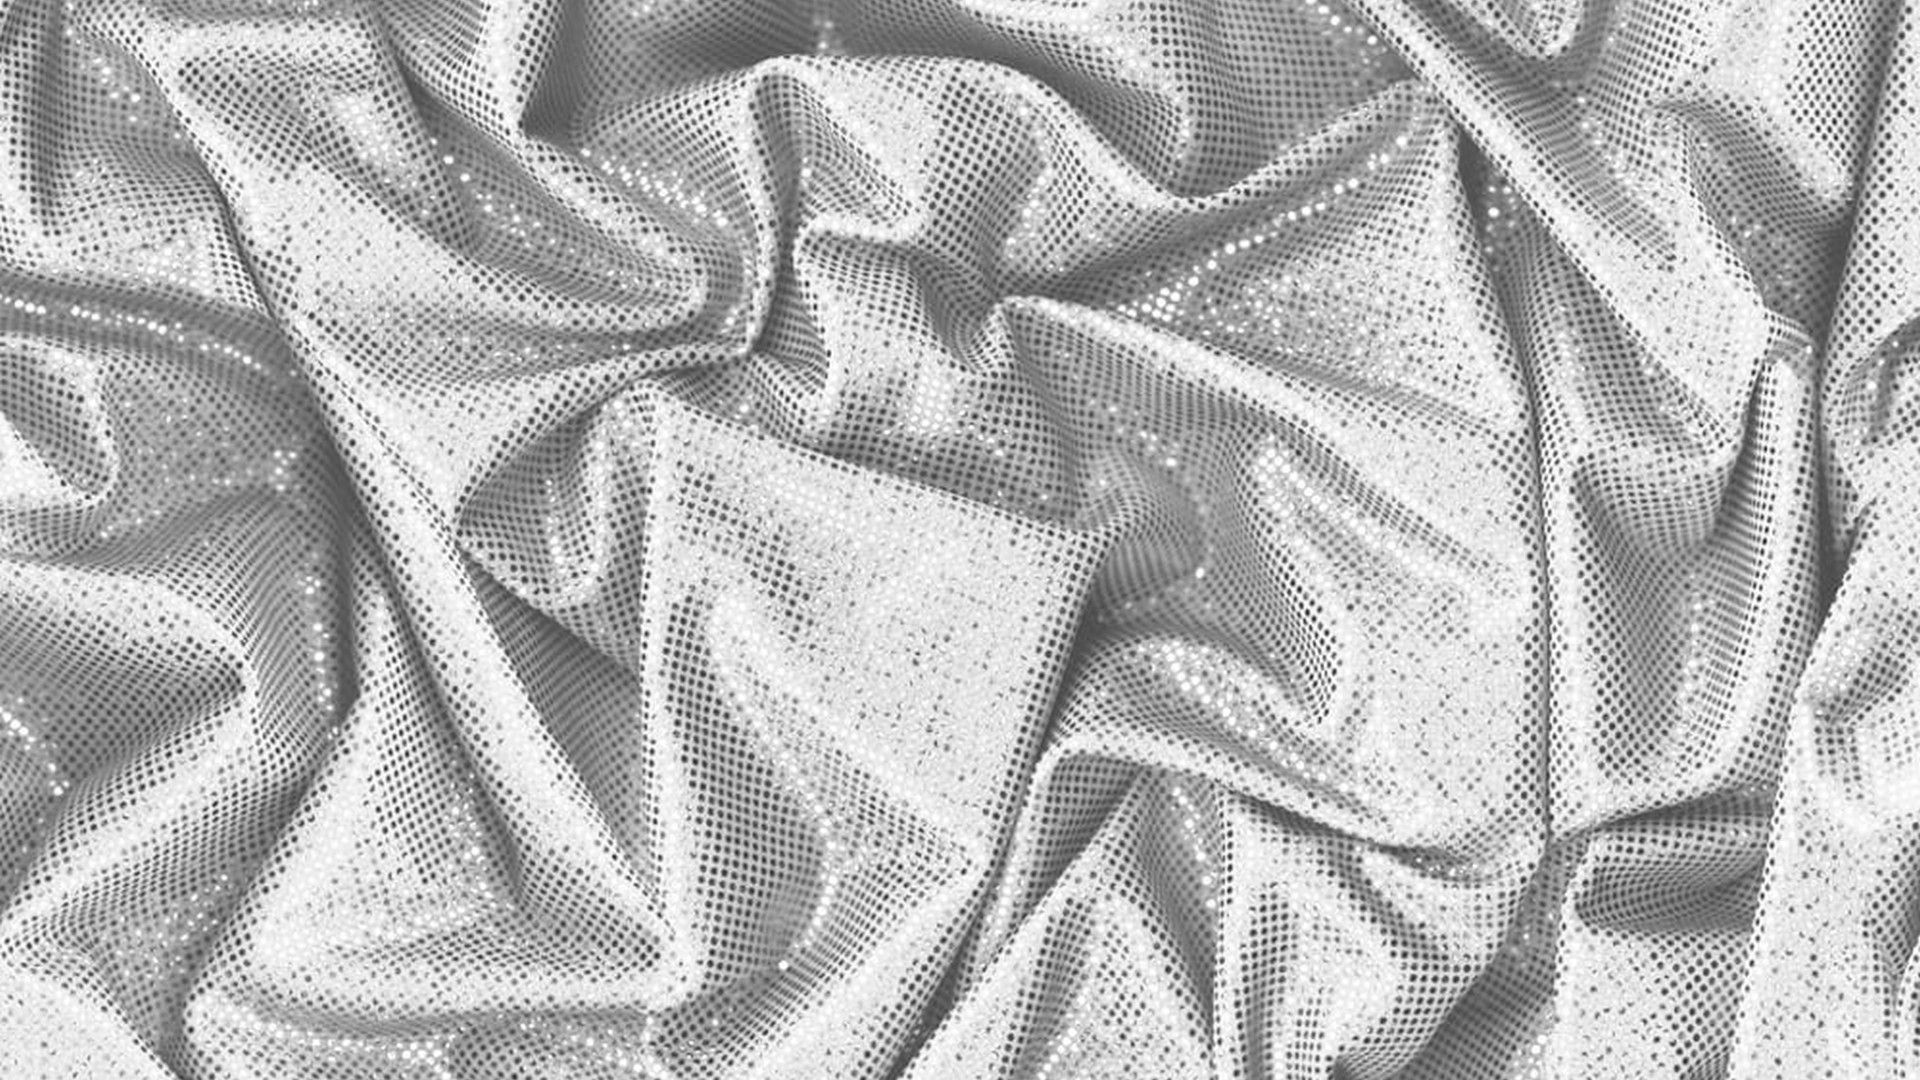 Aggregate 61+ silver aesthetic wallpaper super hot - in.cdgdbentre